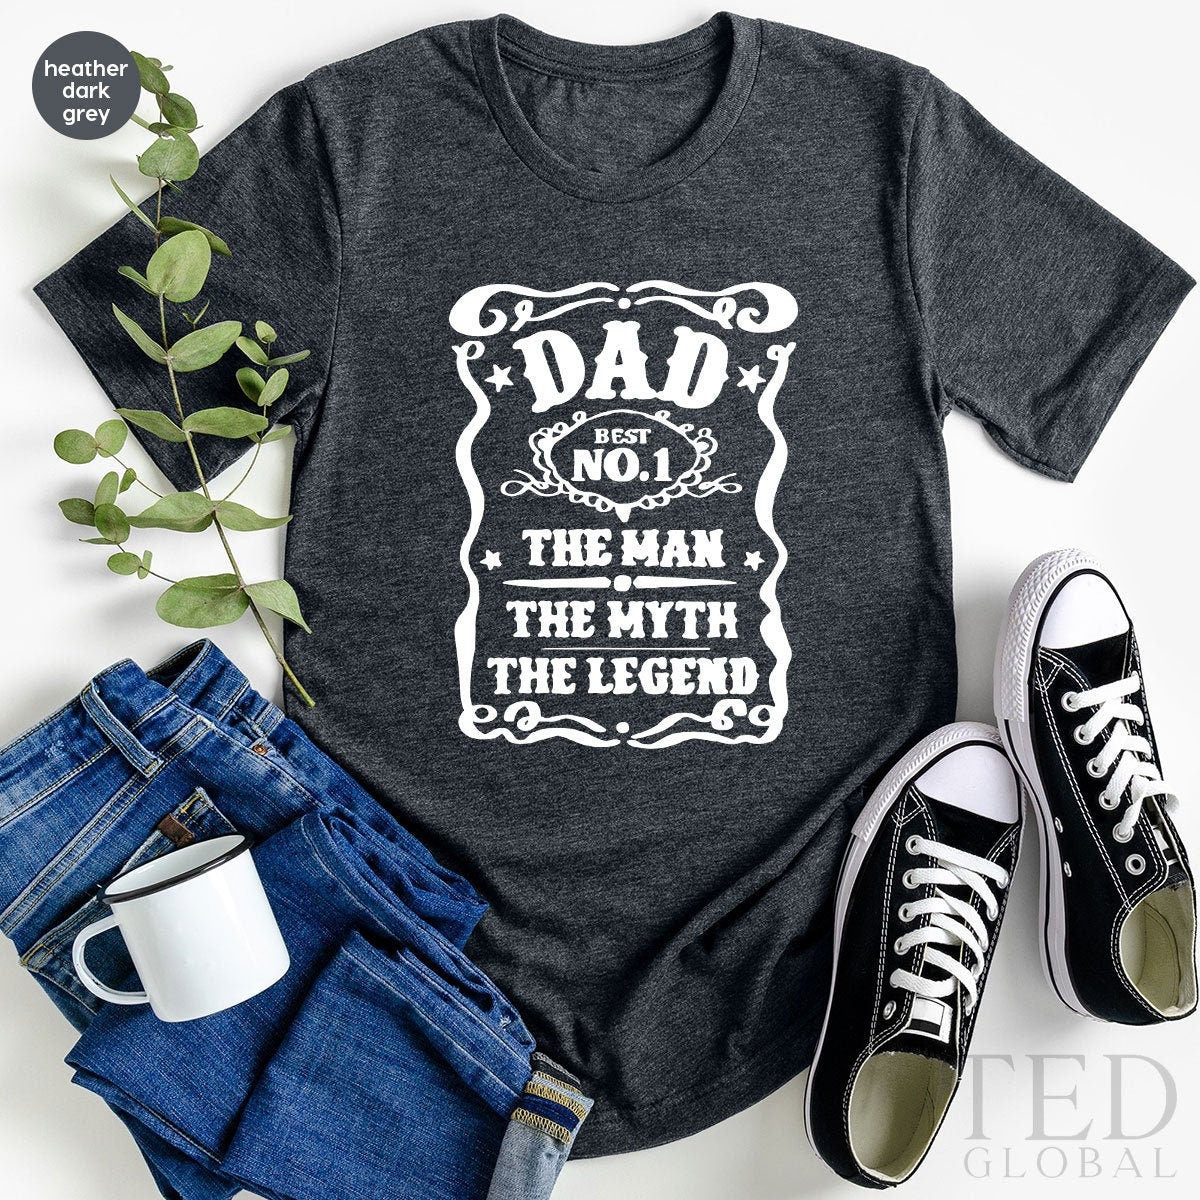  Vintage Reel Cool Papa Novelty T-Shirt - Father Gift Shirt :  Clothing, Shoes & Jewelry